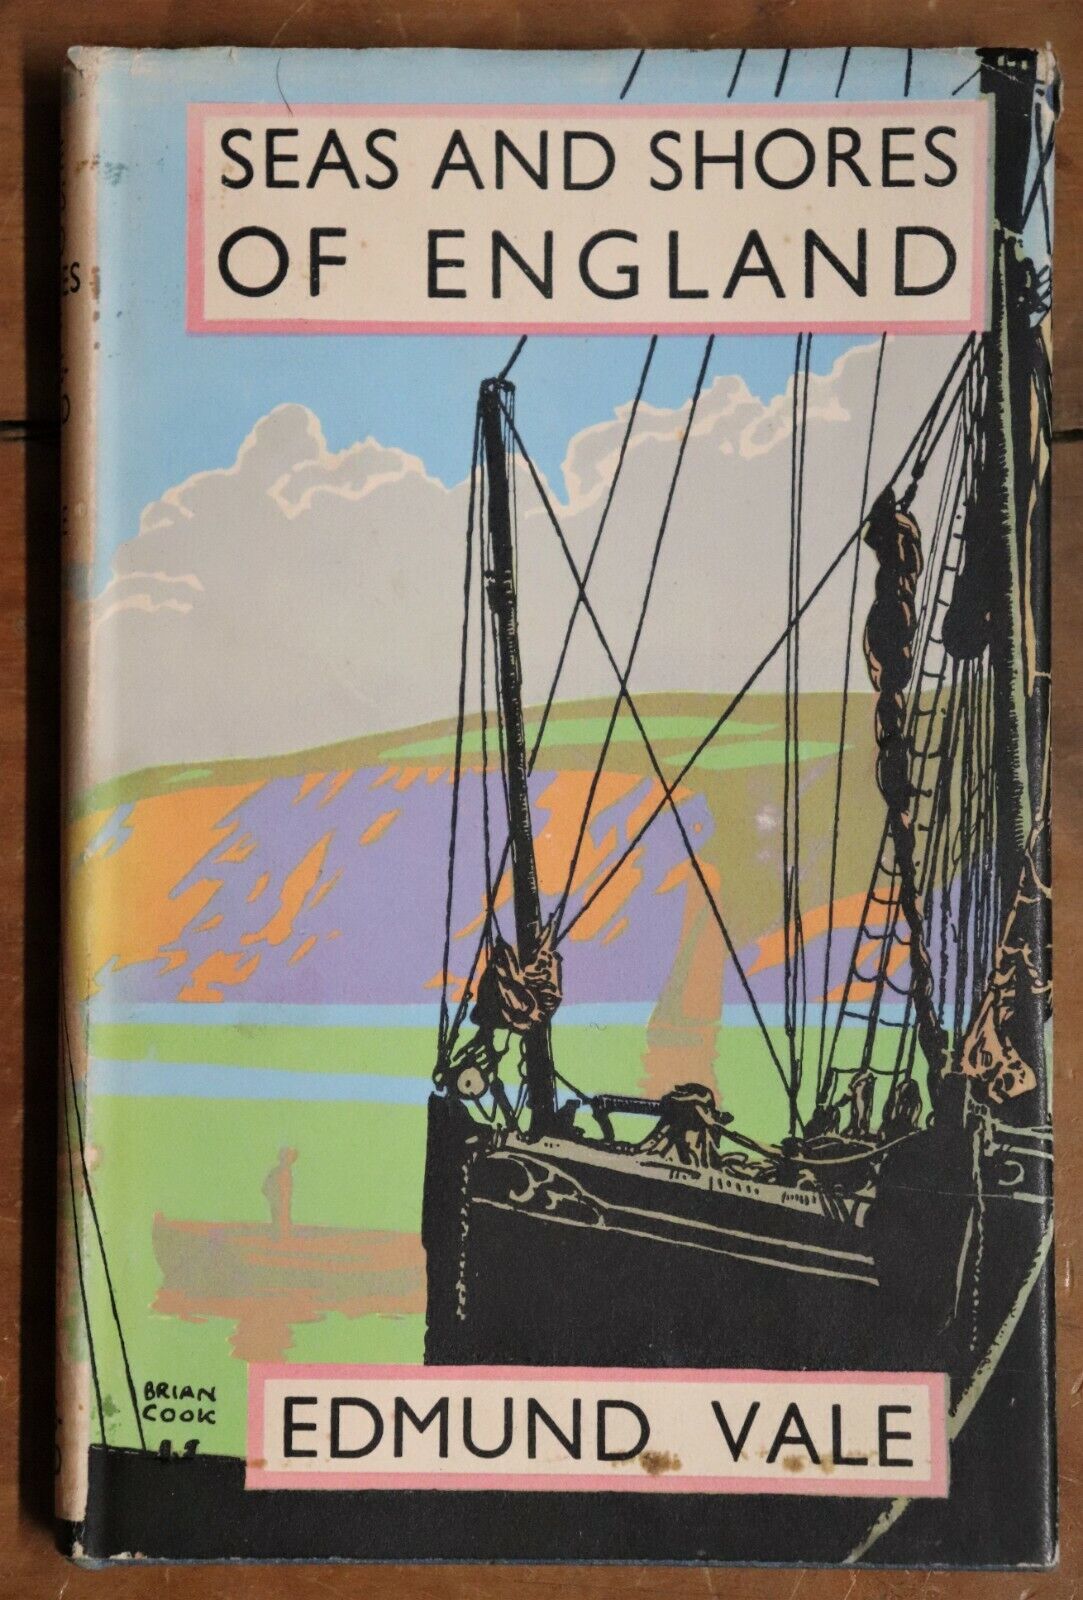 The Seas & Shores Of England by Edmund Vale - 1950 - British History Book